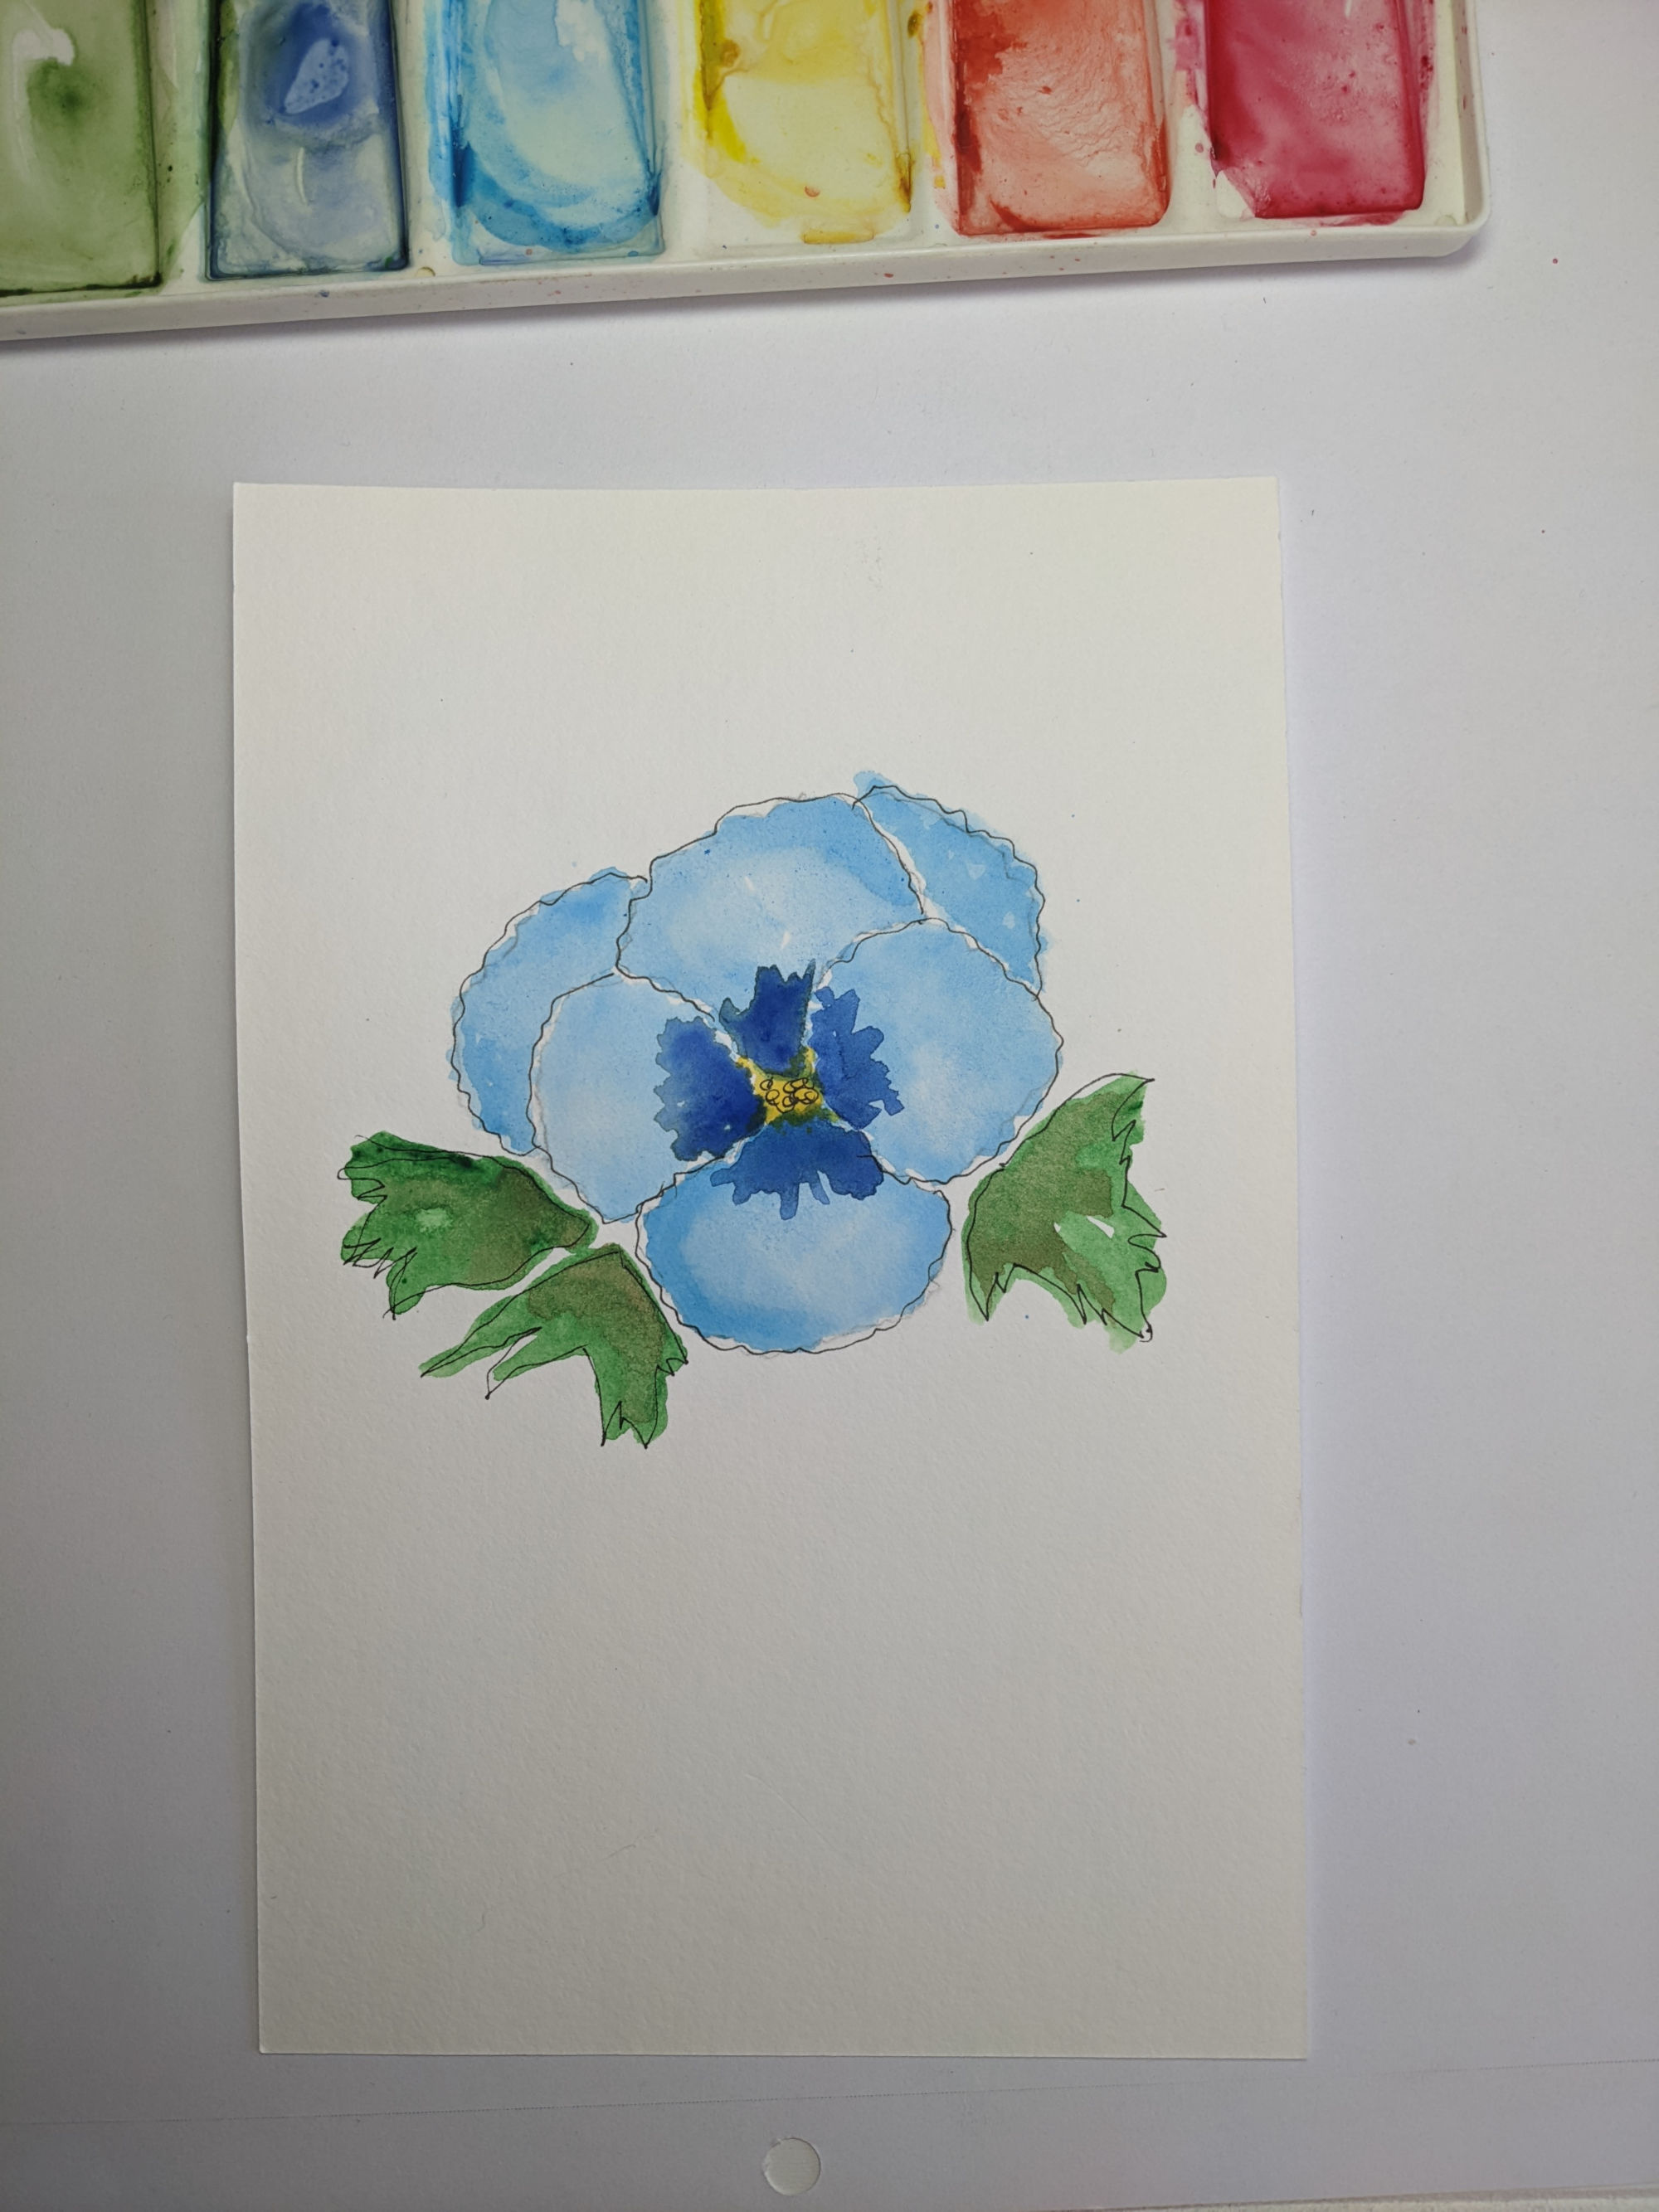 Completed watercolor & inked blue flower